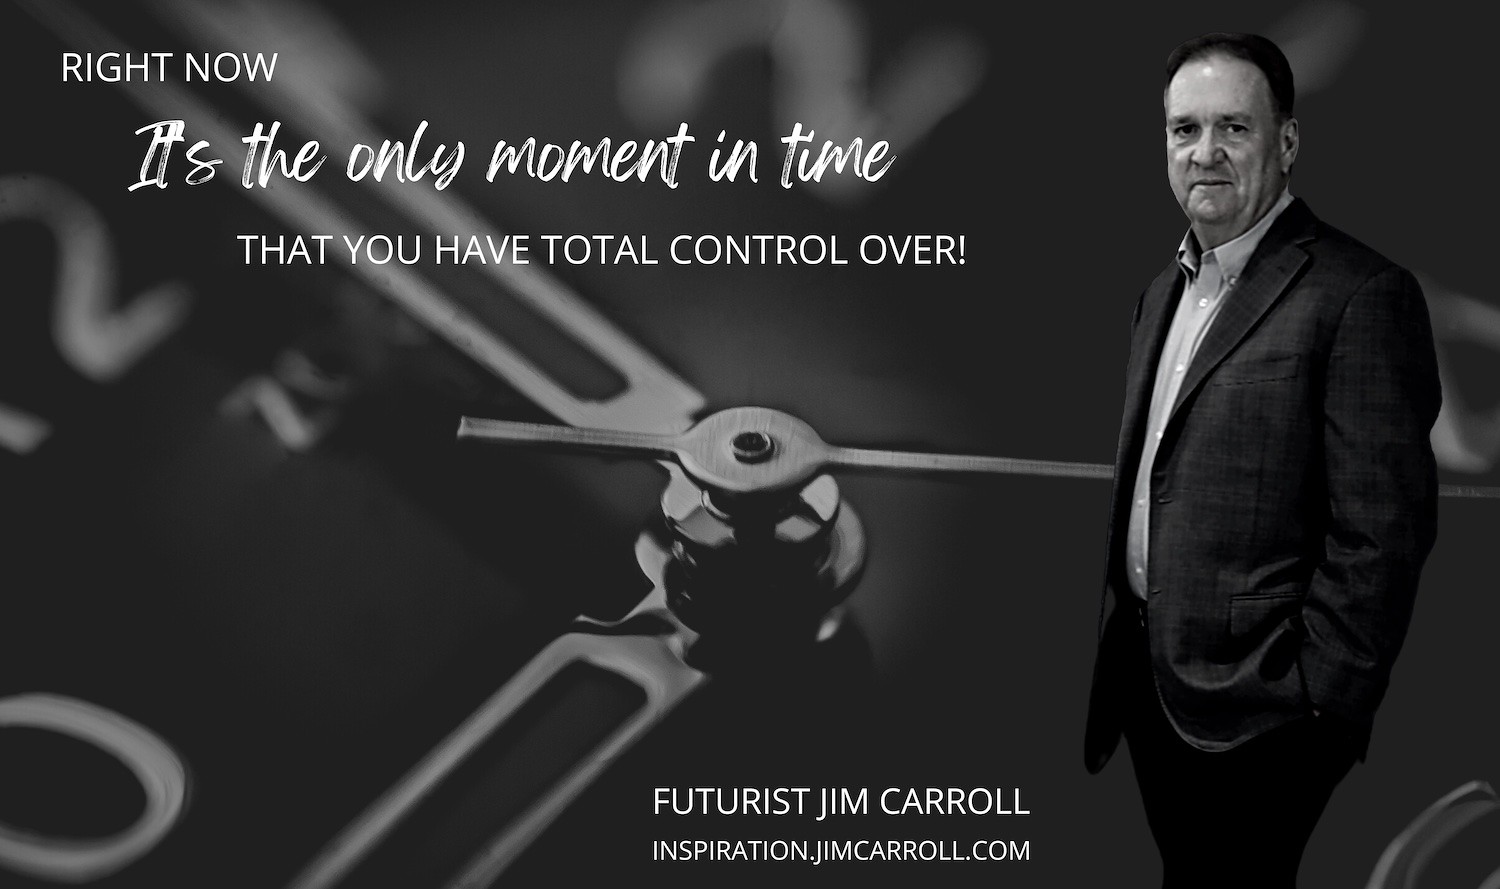 "Right now. It's the only moment in time that you have total control over!" - Futurist Jim Carroll